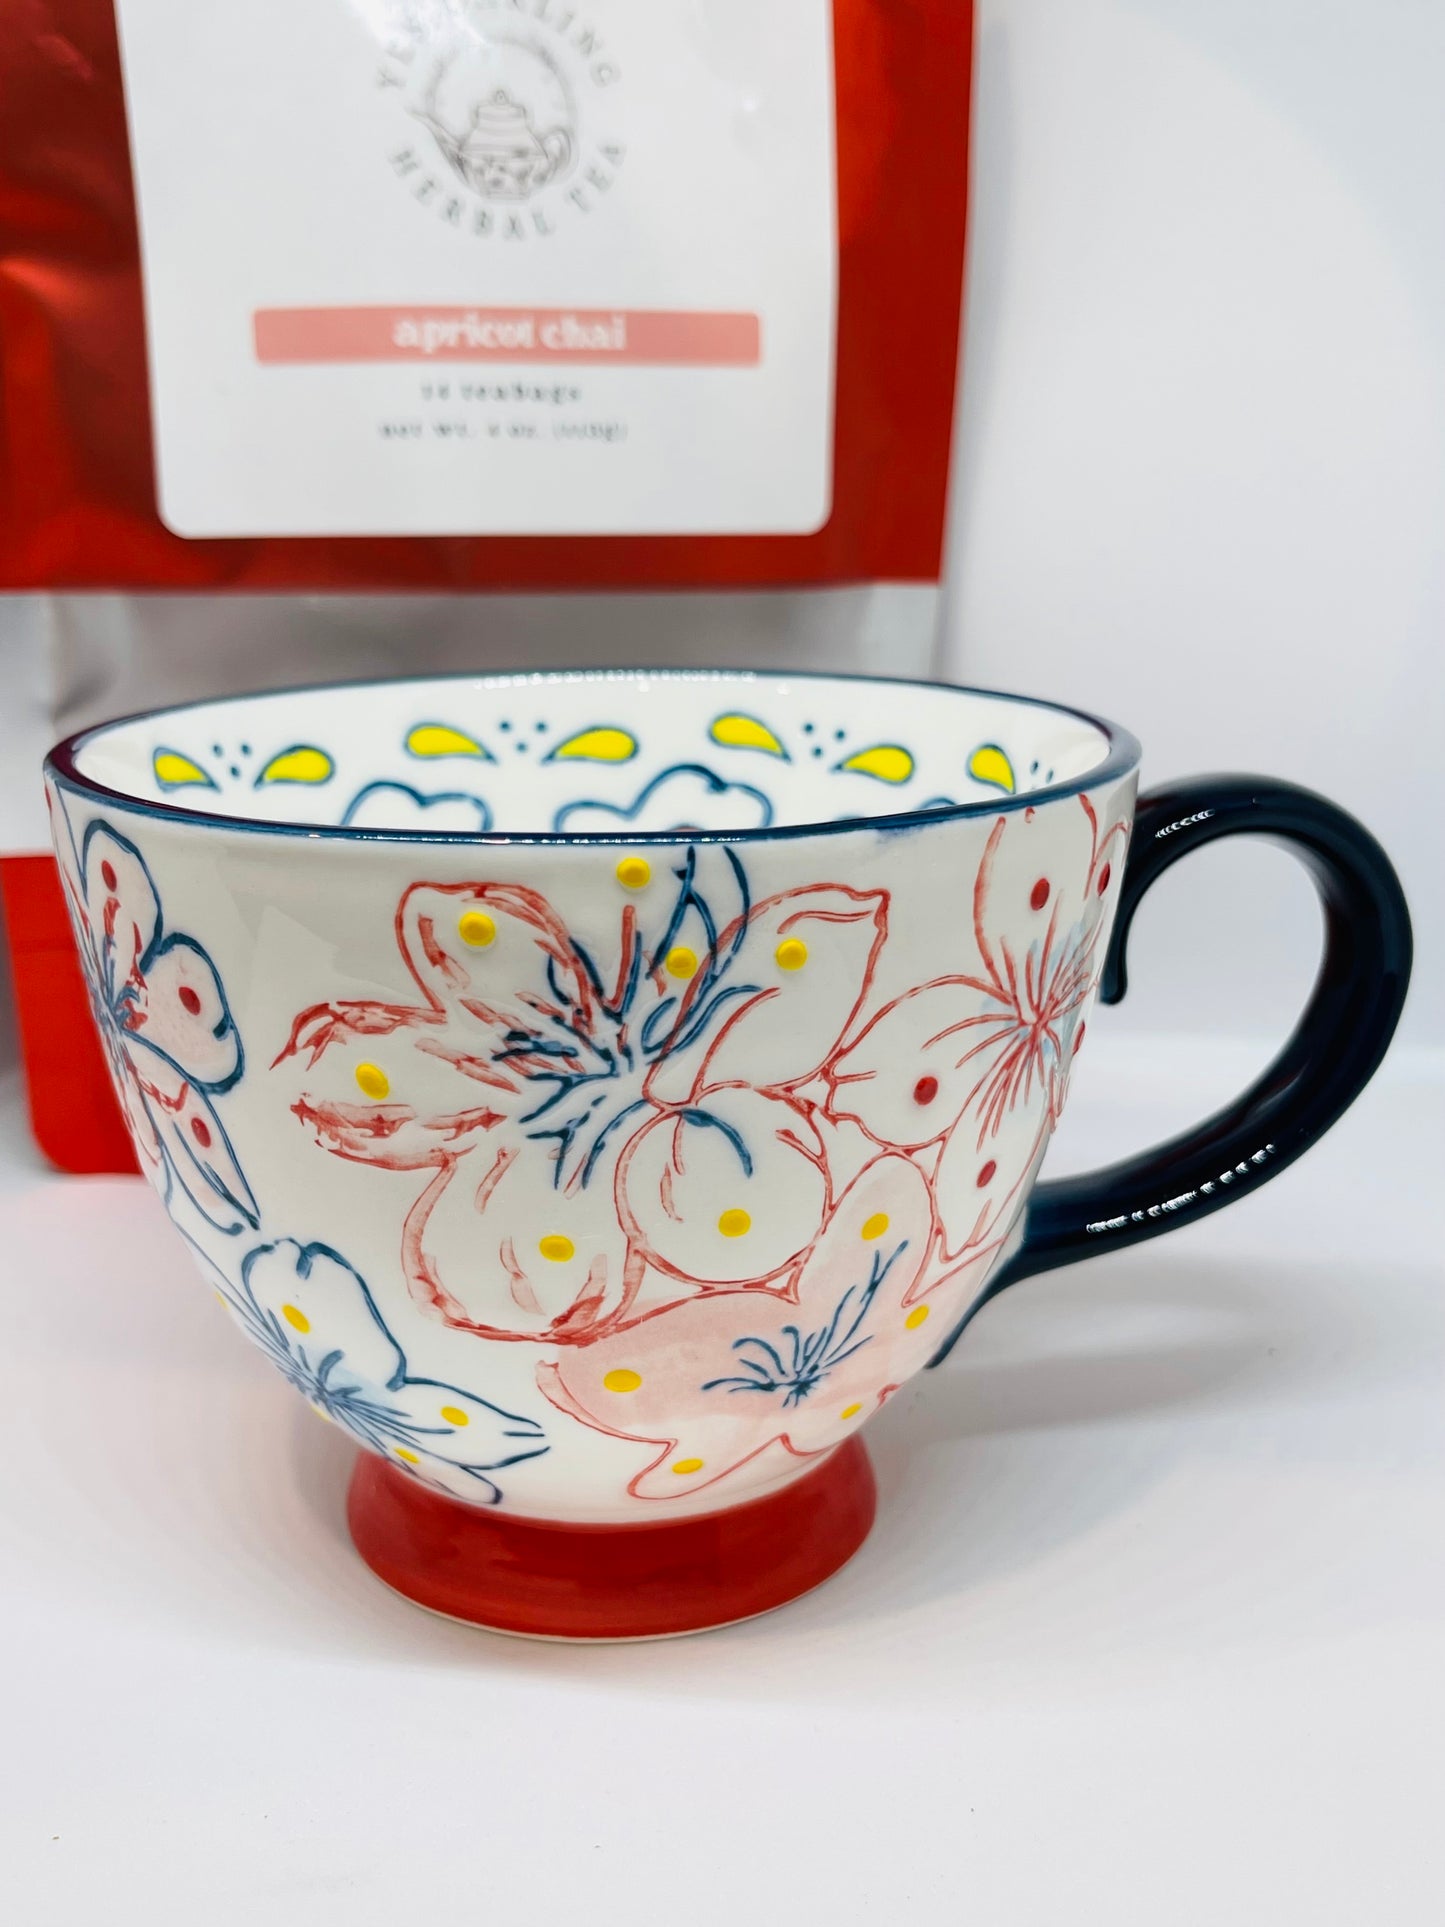 A white mug with red and navy blue trimmed flowers with yellow and red dots, a navy blue rim, a red handle, and a navy blue base.